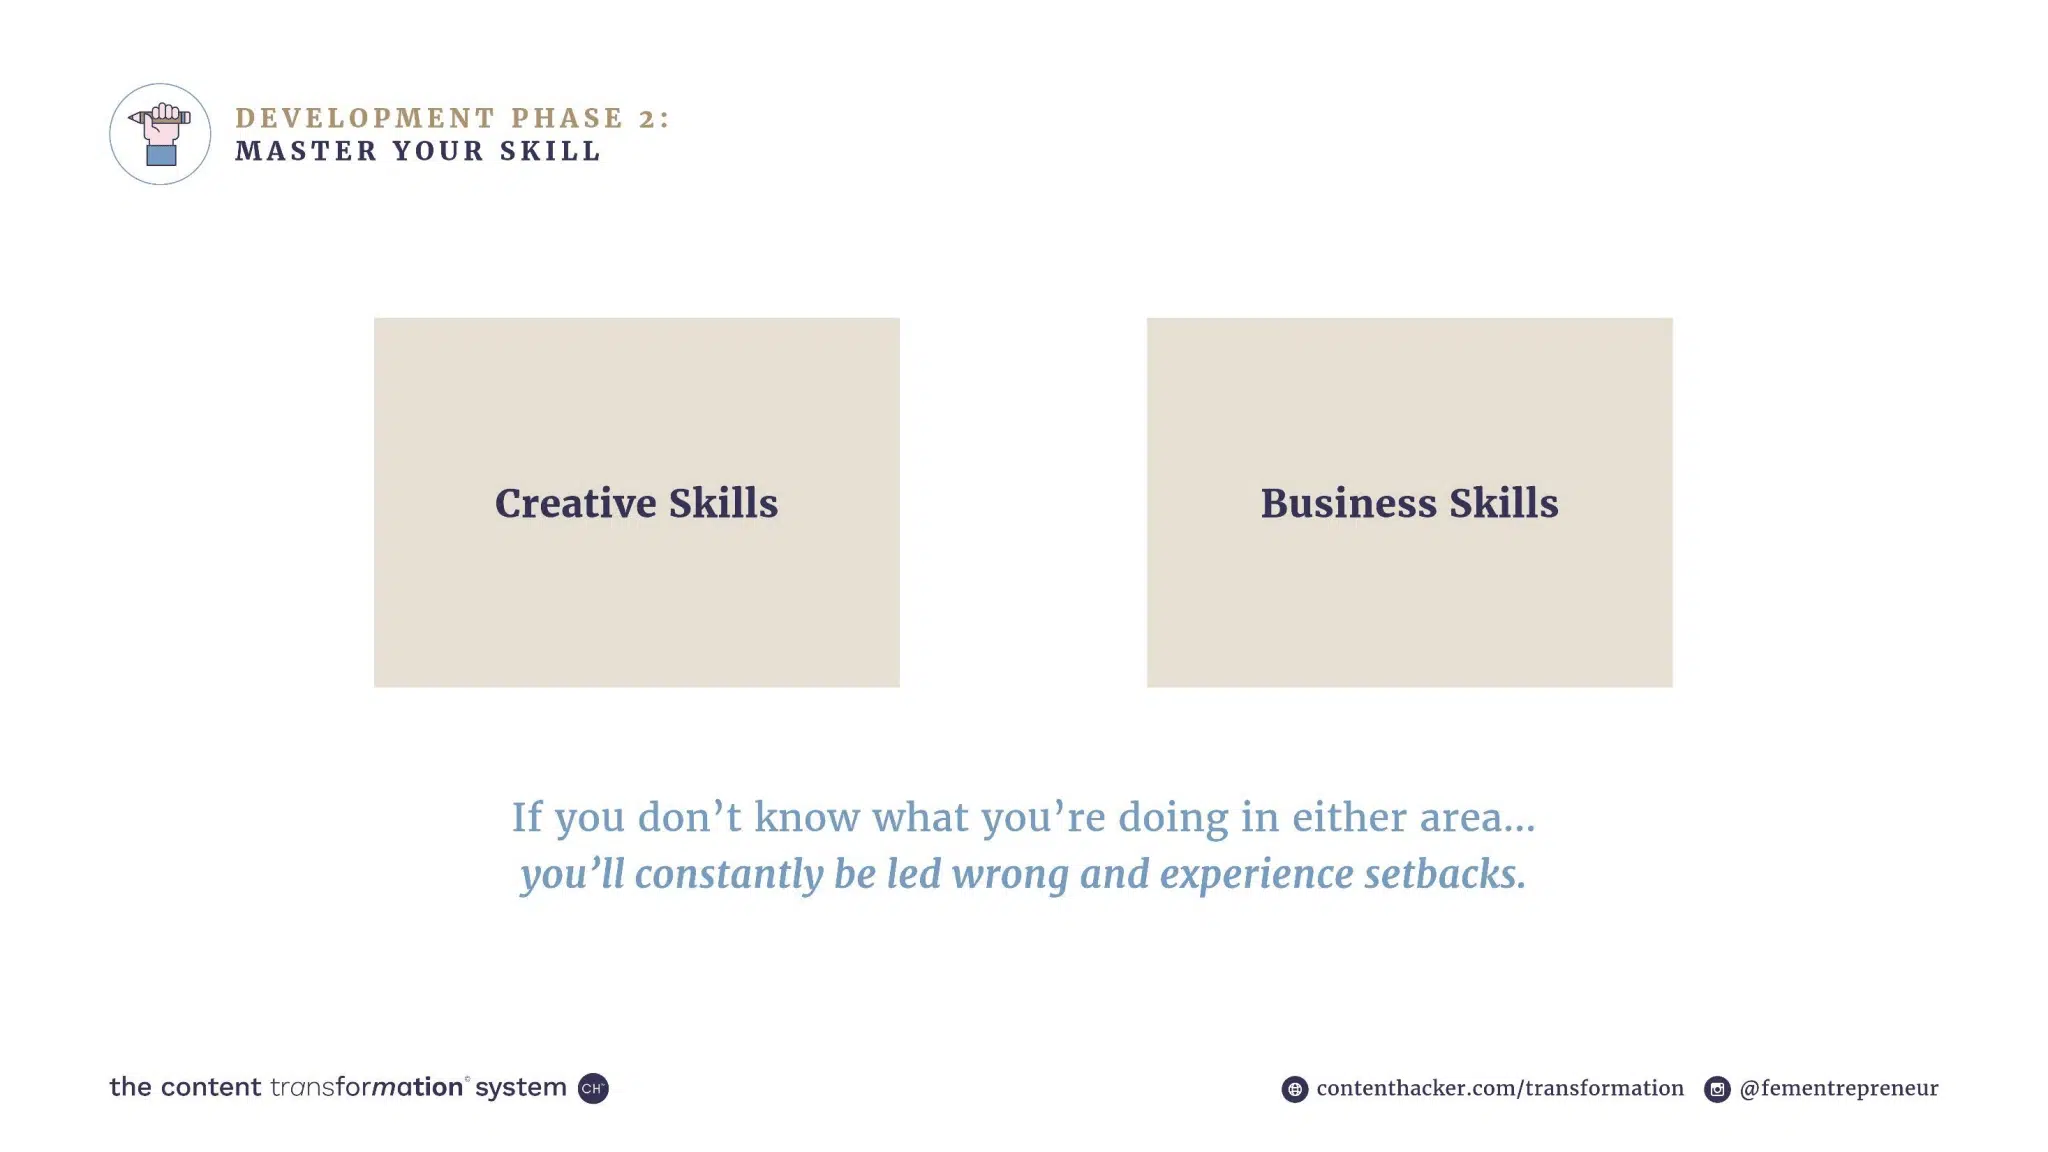 creative skills and business skills are separate